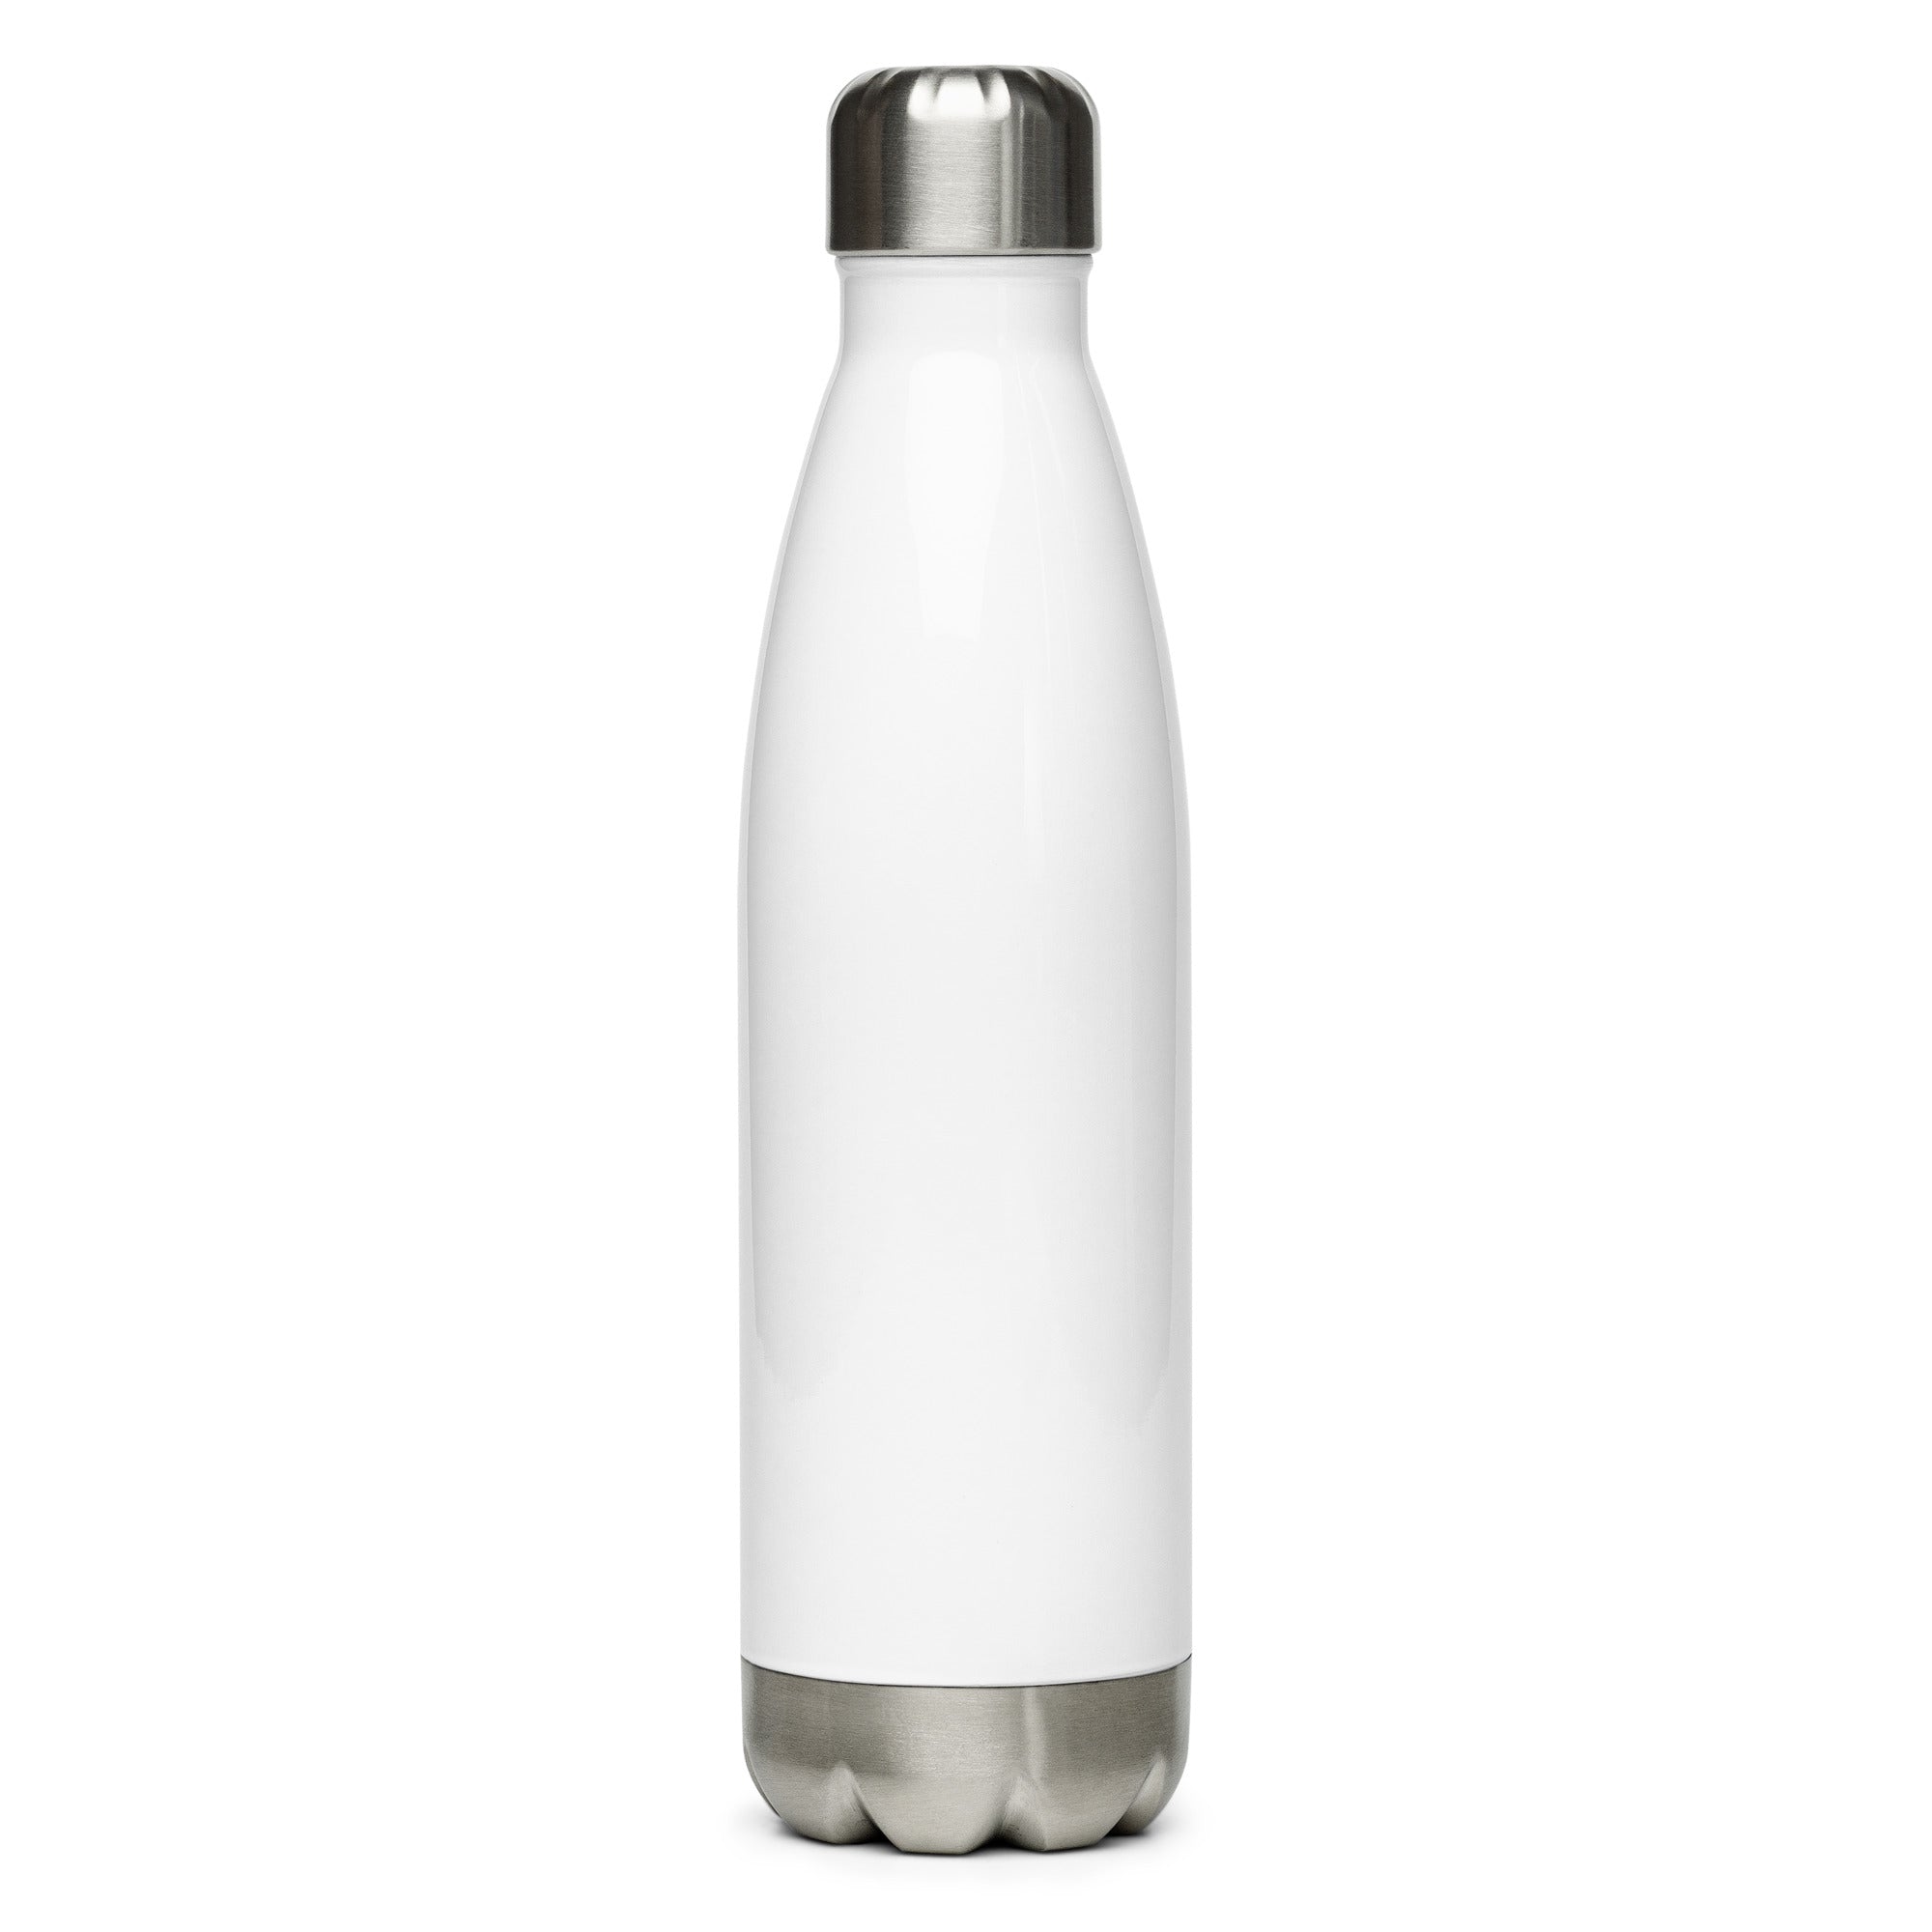 UKHC Stainless Steel Water Bottle